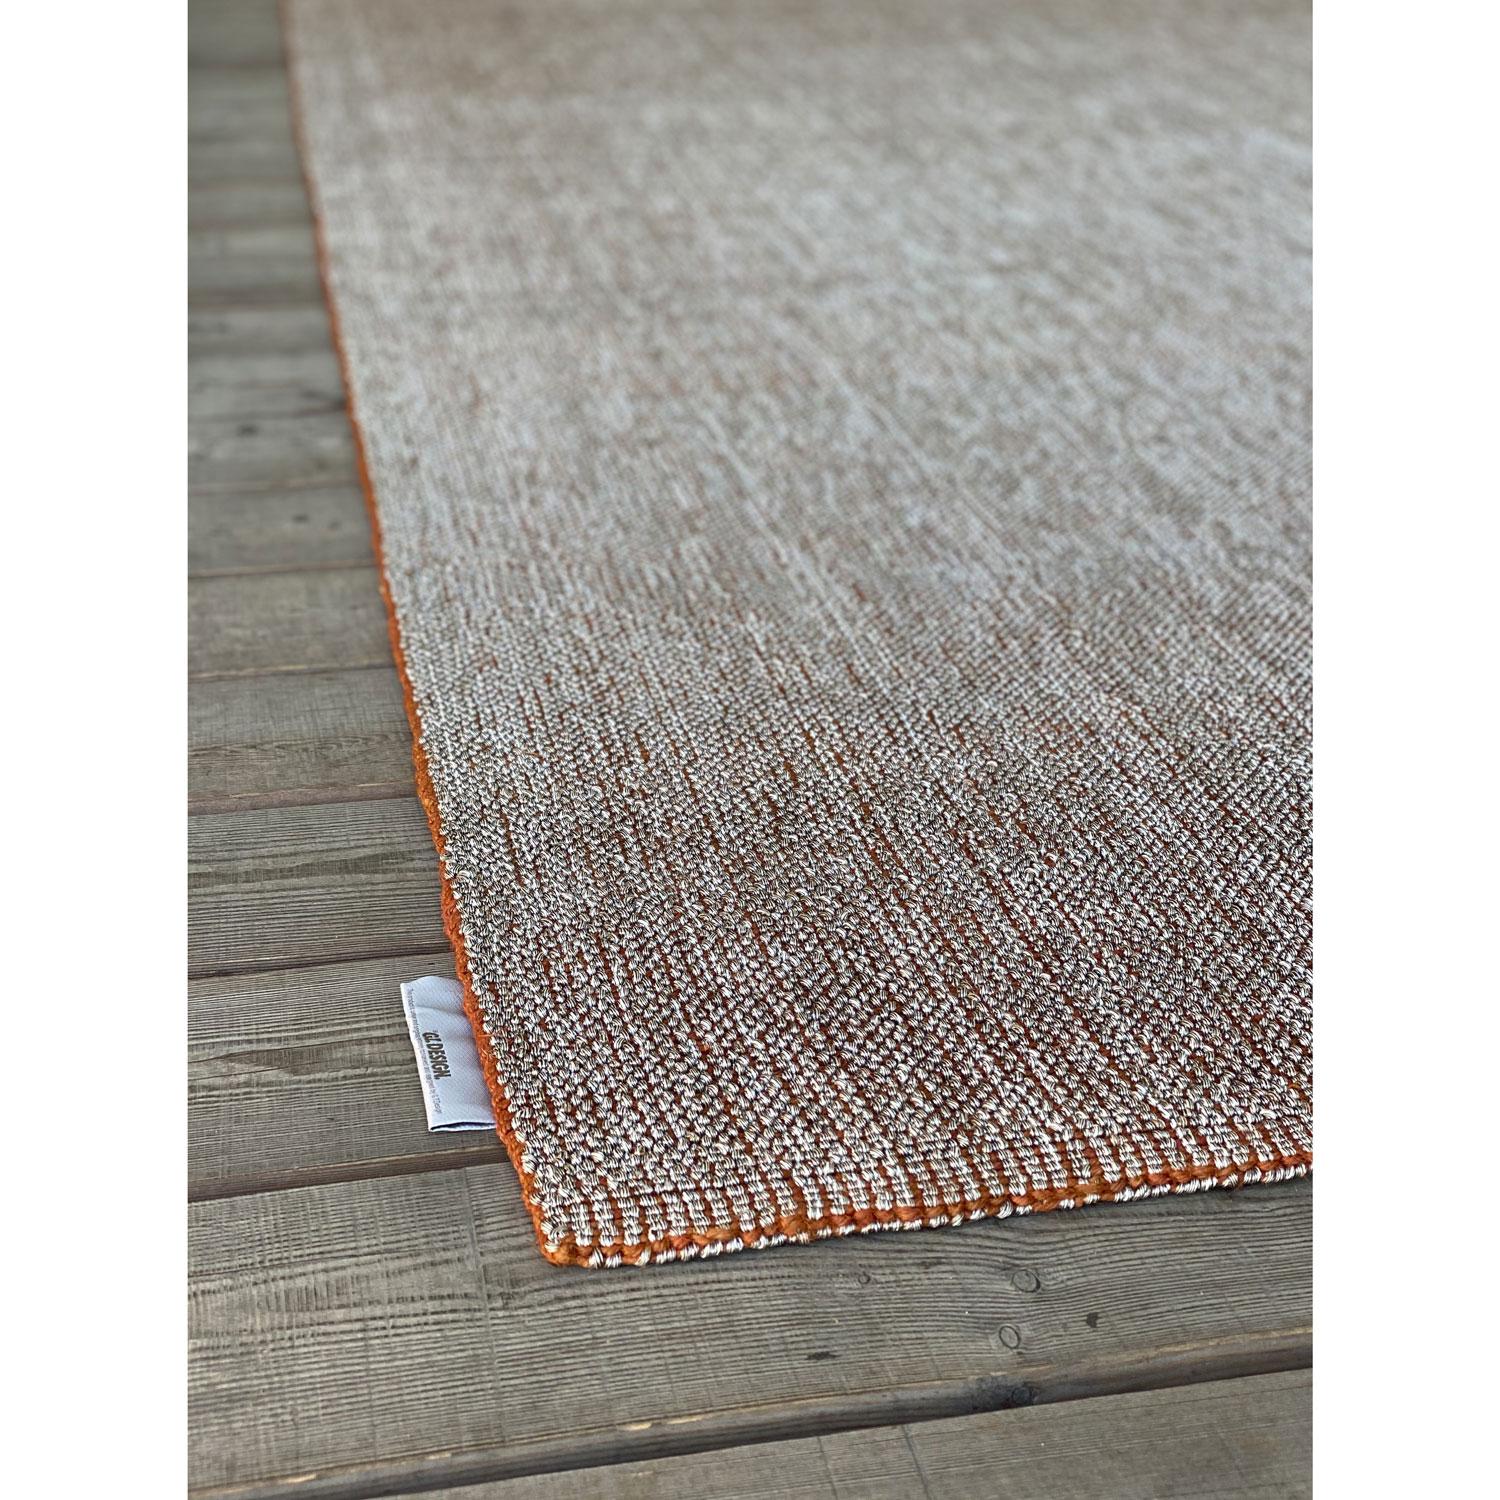 Hand-Woven 21st Century Performing Grey Orange Rug by Deanna Comellini 200x300 cm For Sale